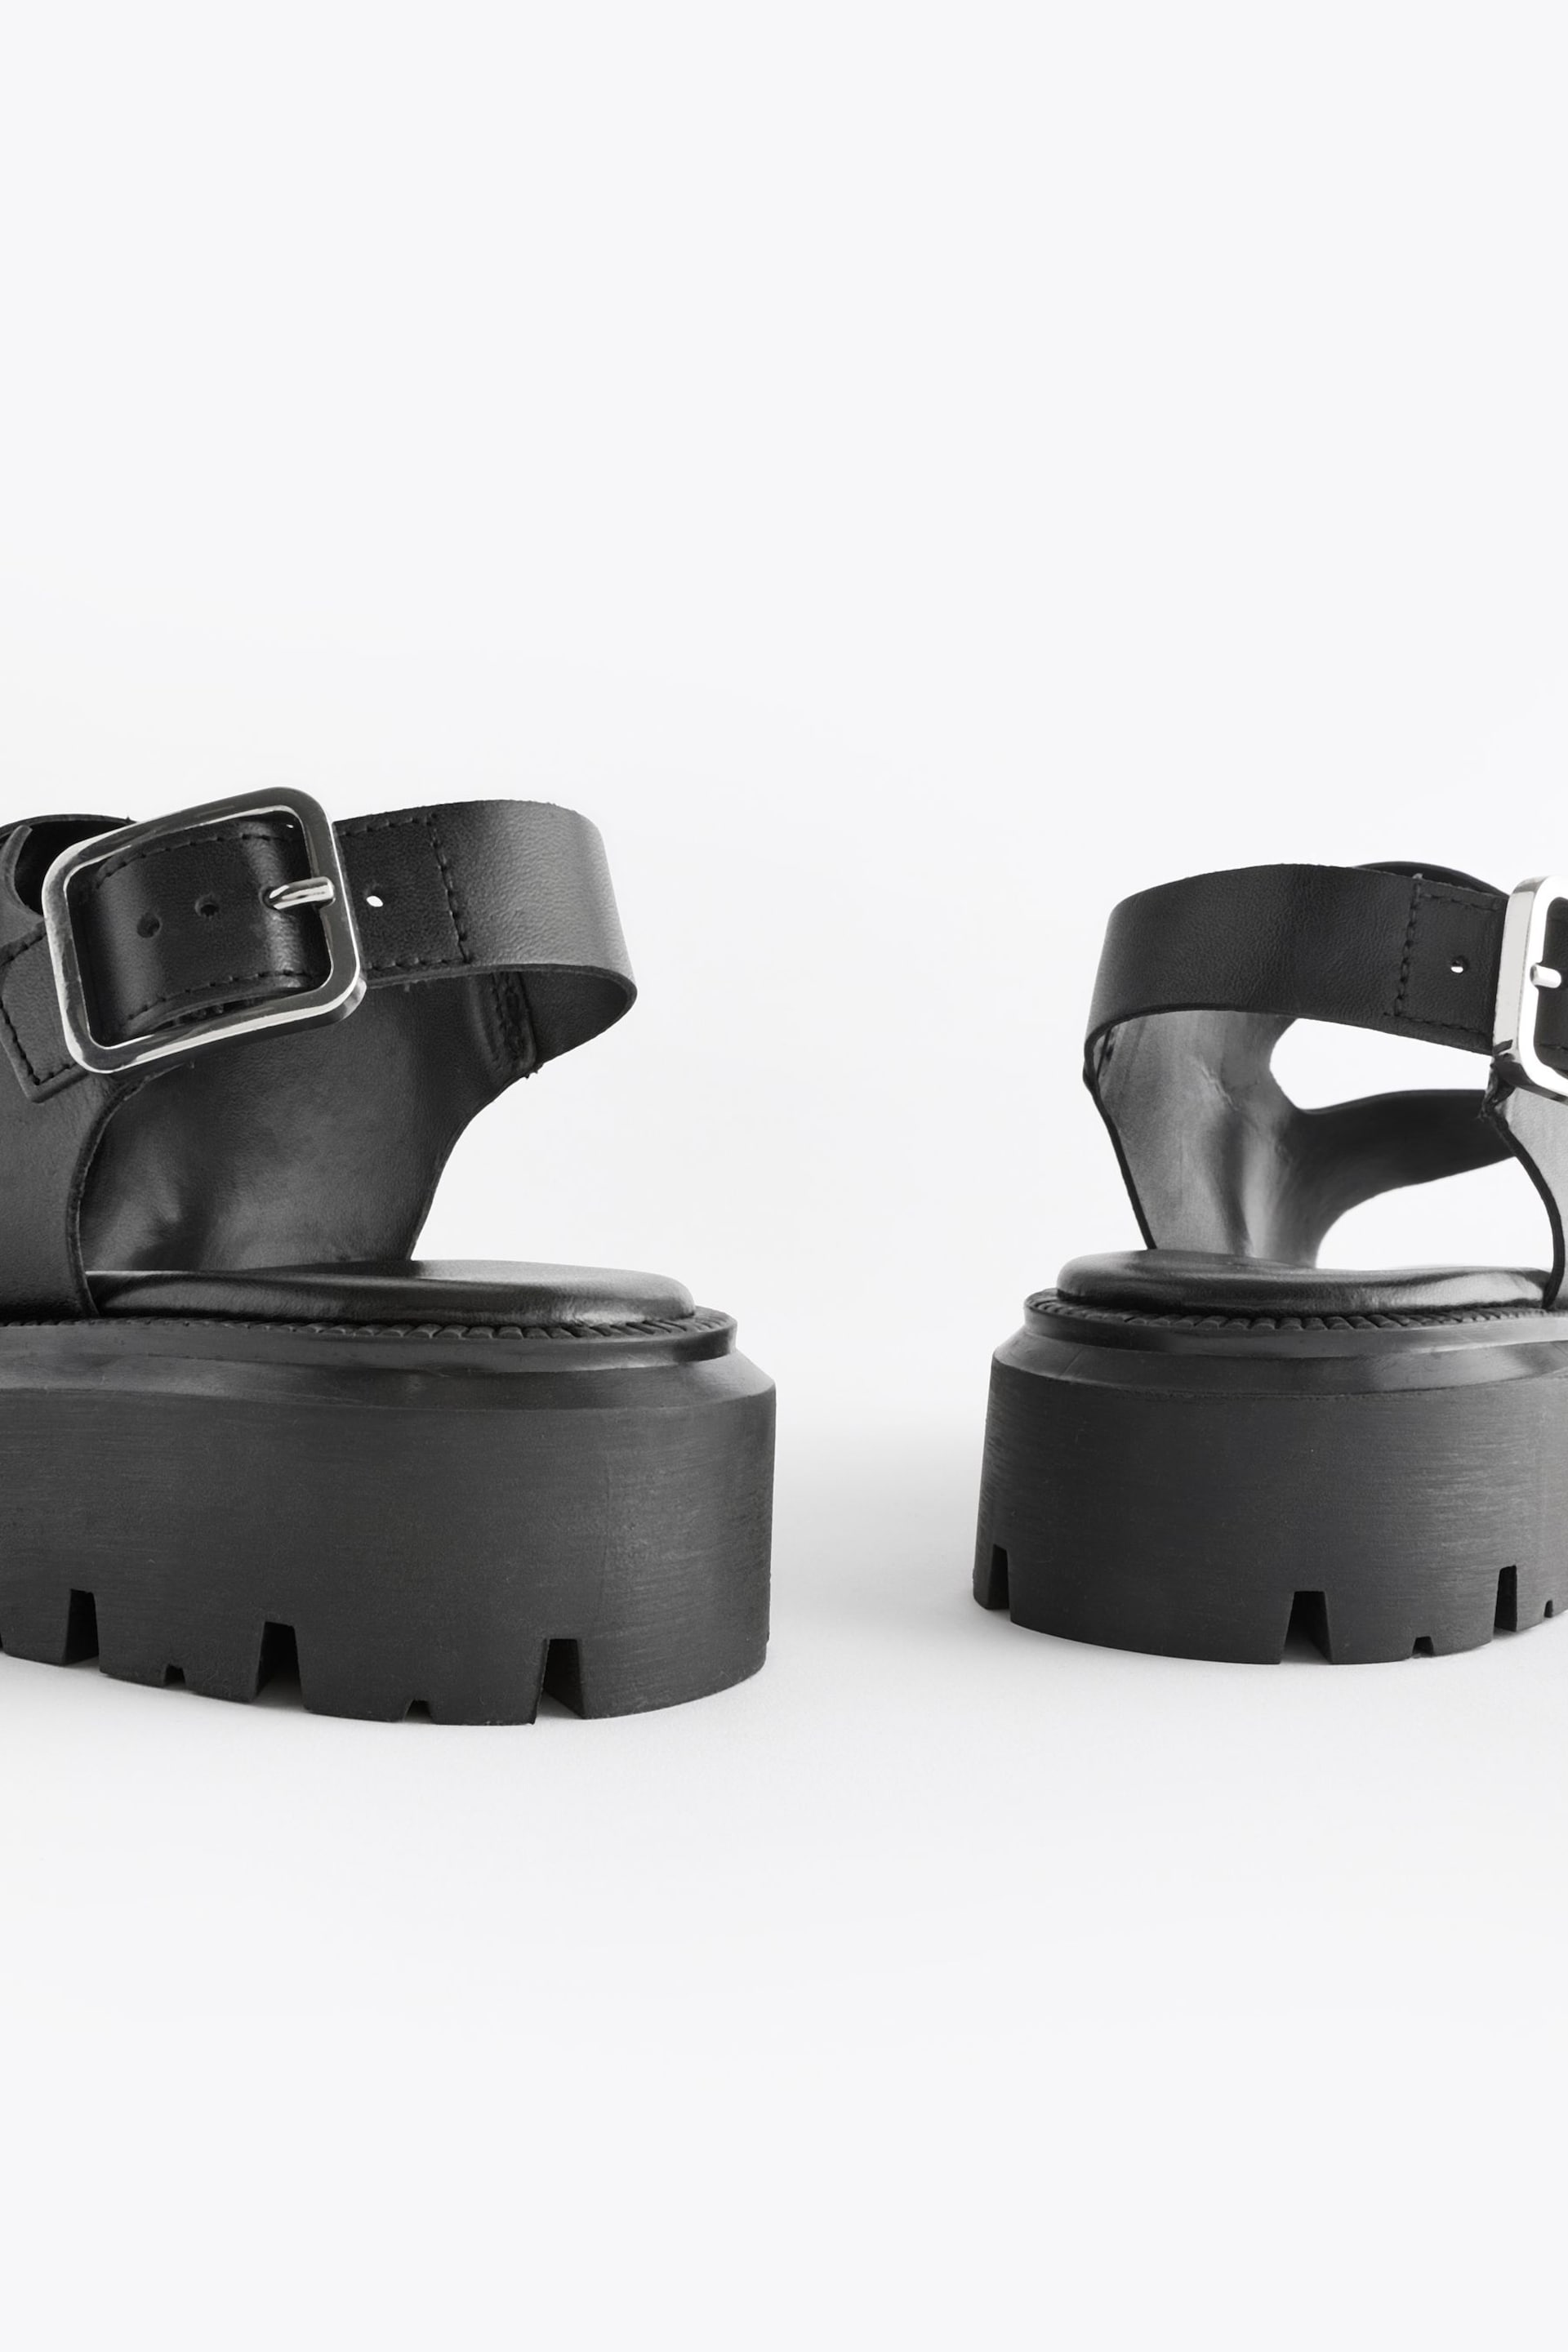 Black Regular/Wide Fit Premium Leather Chunky Cleated Sandals - Image 6 of 8